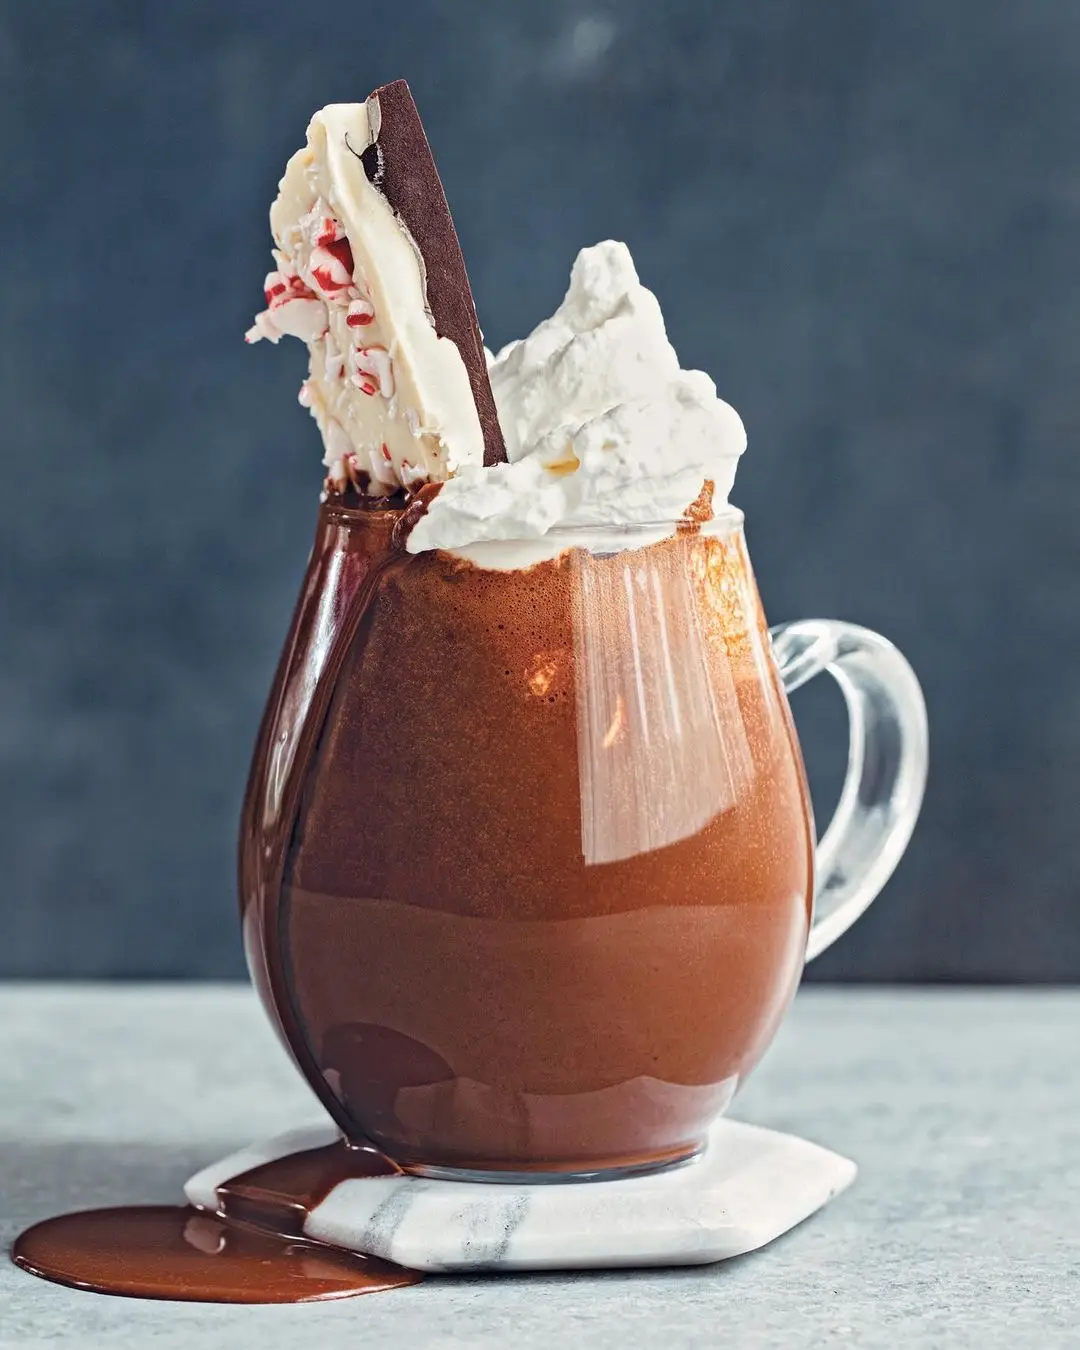 24 Mugs of Delicious Hot Chocolate Sure to Warm You up ...